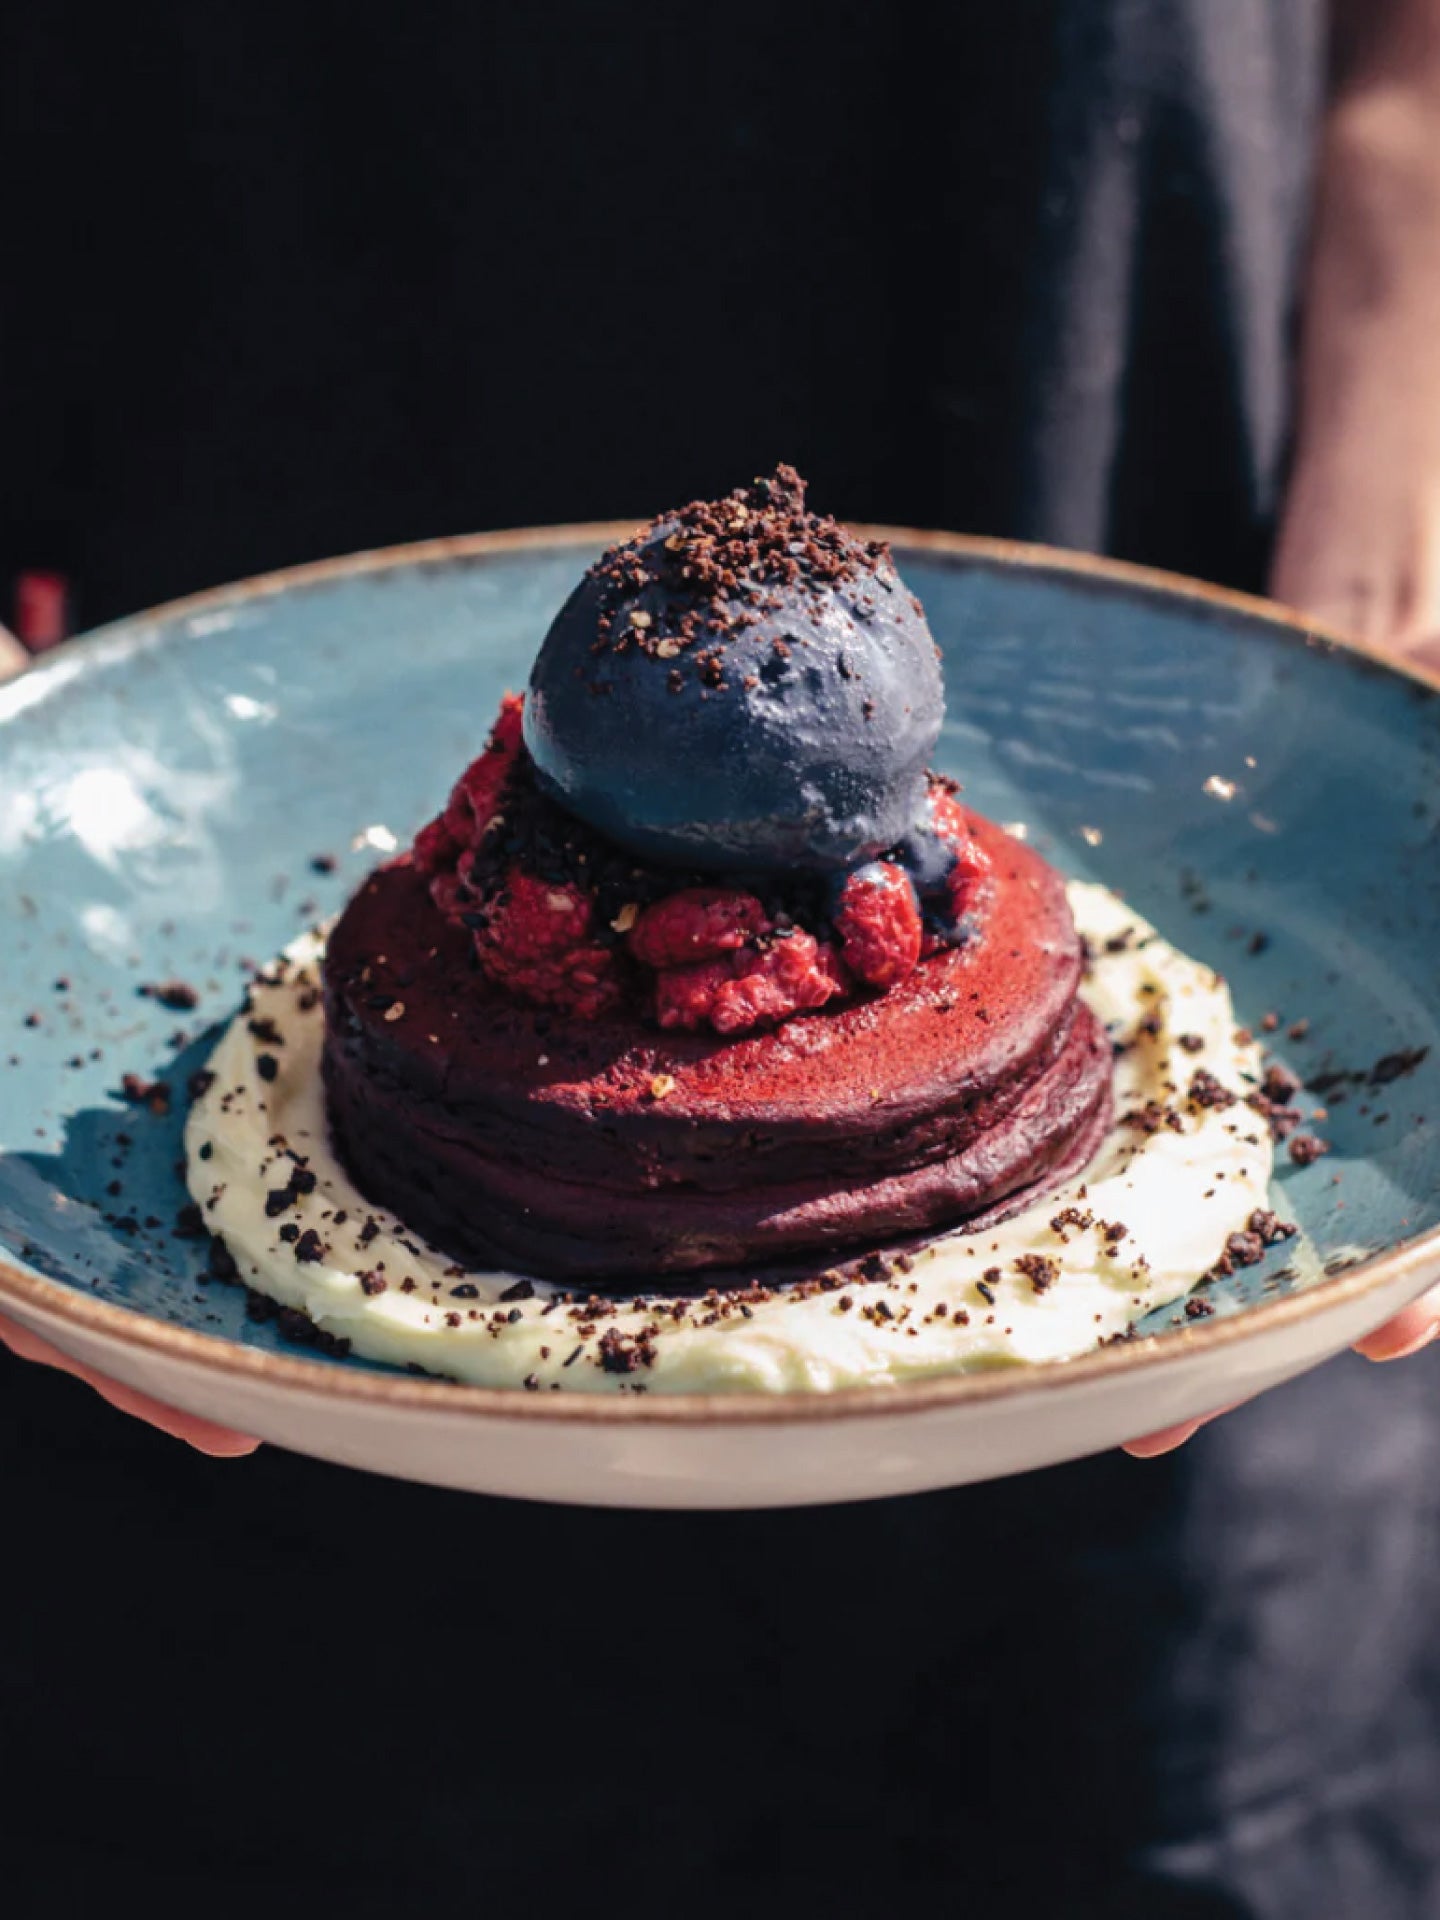 Indulge in Love. Book for Valentine's Day for the return of our Red Velvet Pancakes. Or shop online for your special someone.